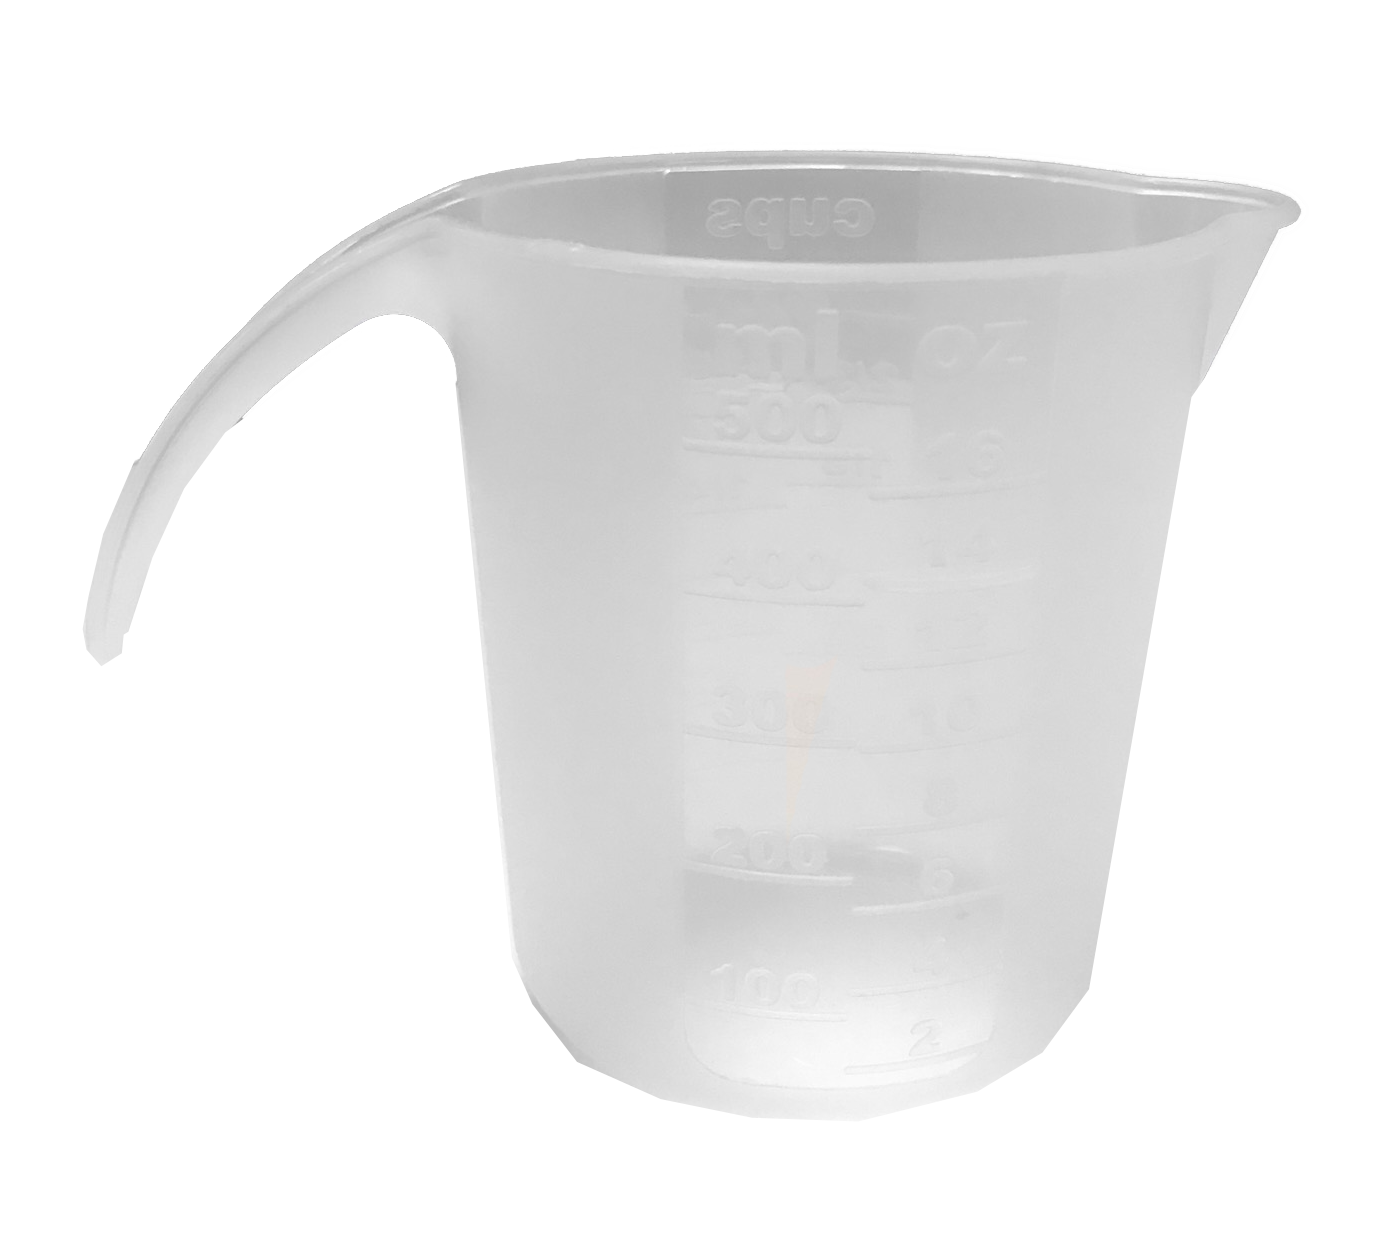 Fjc 2782 Measuring Cup